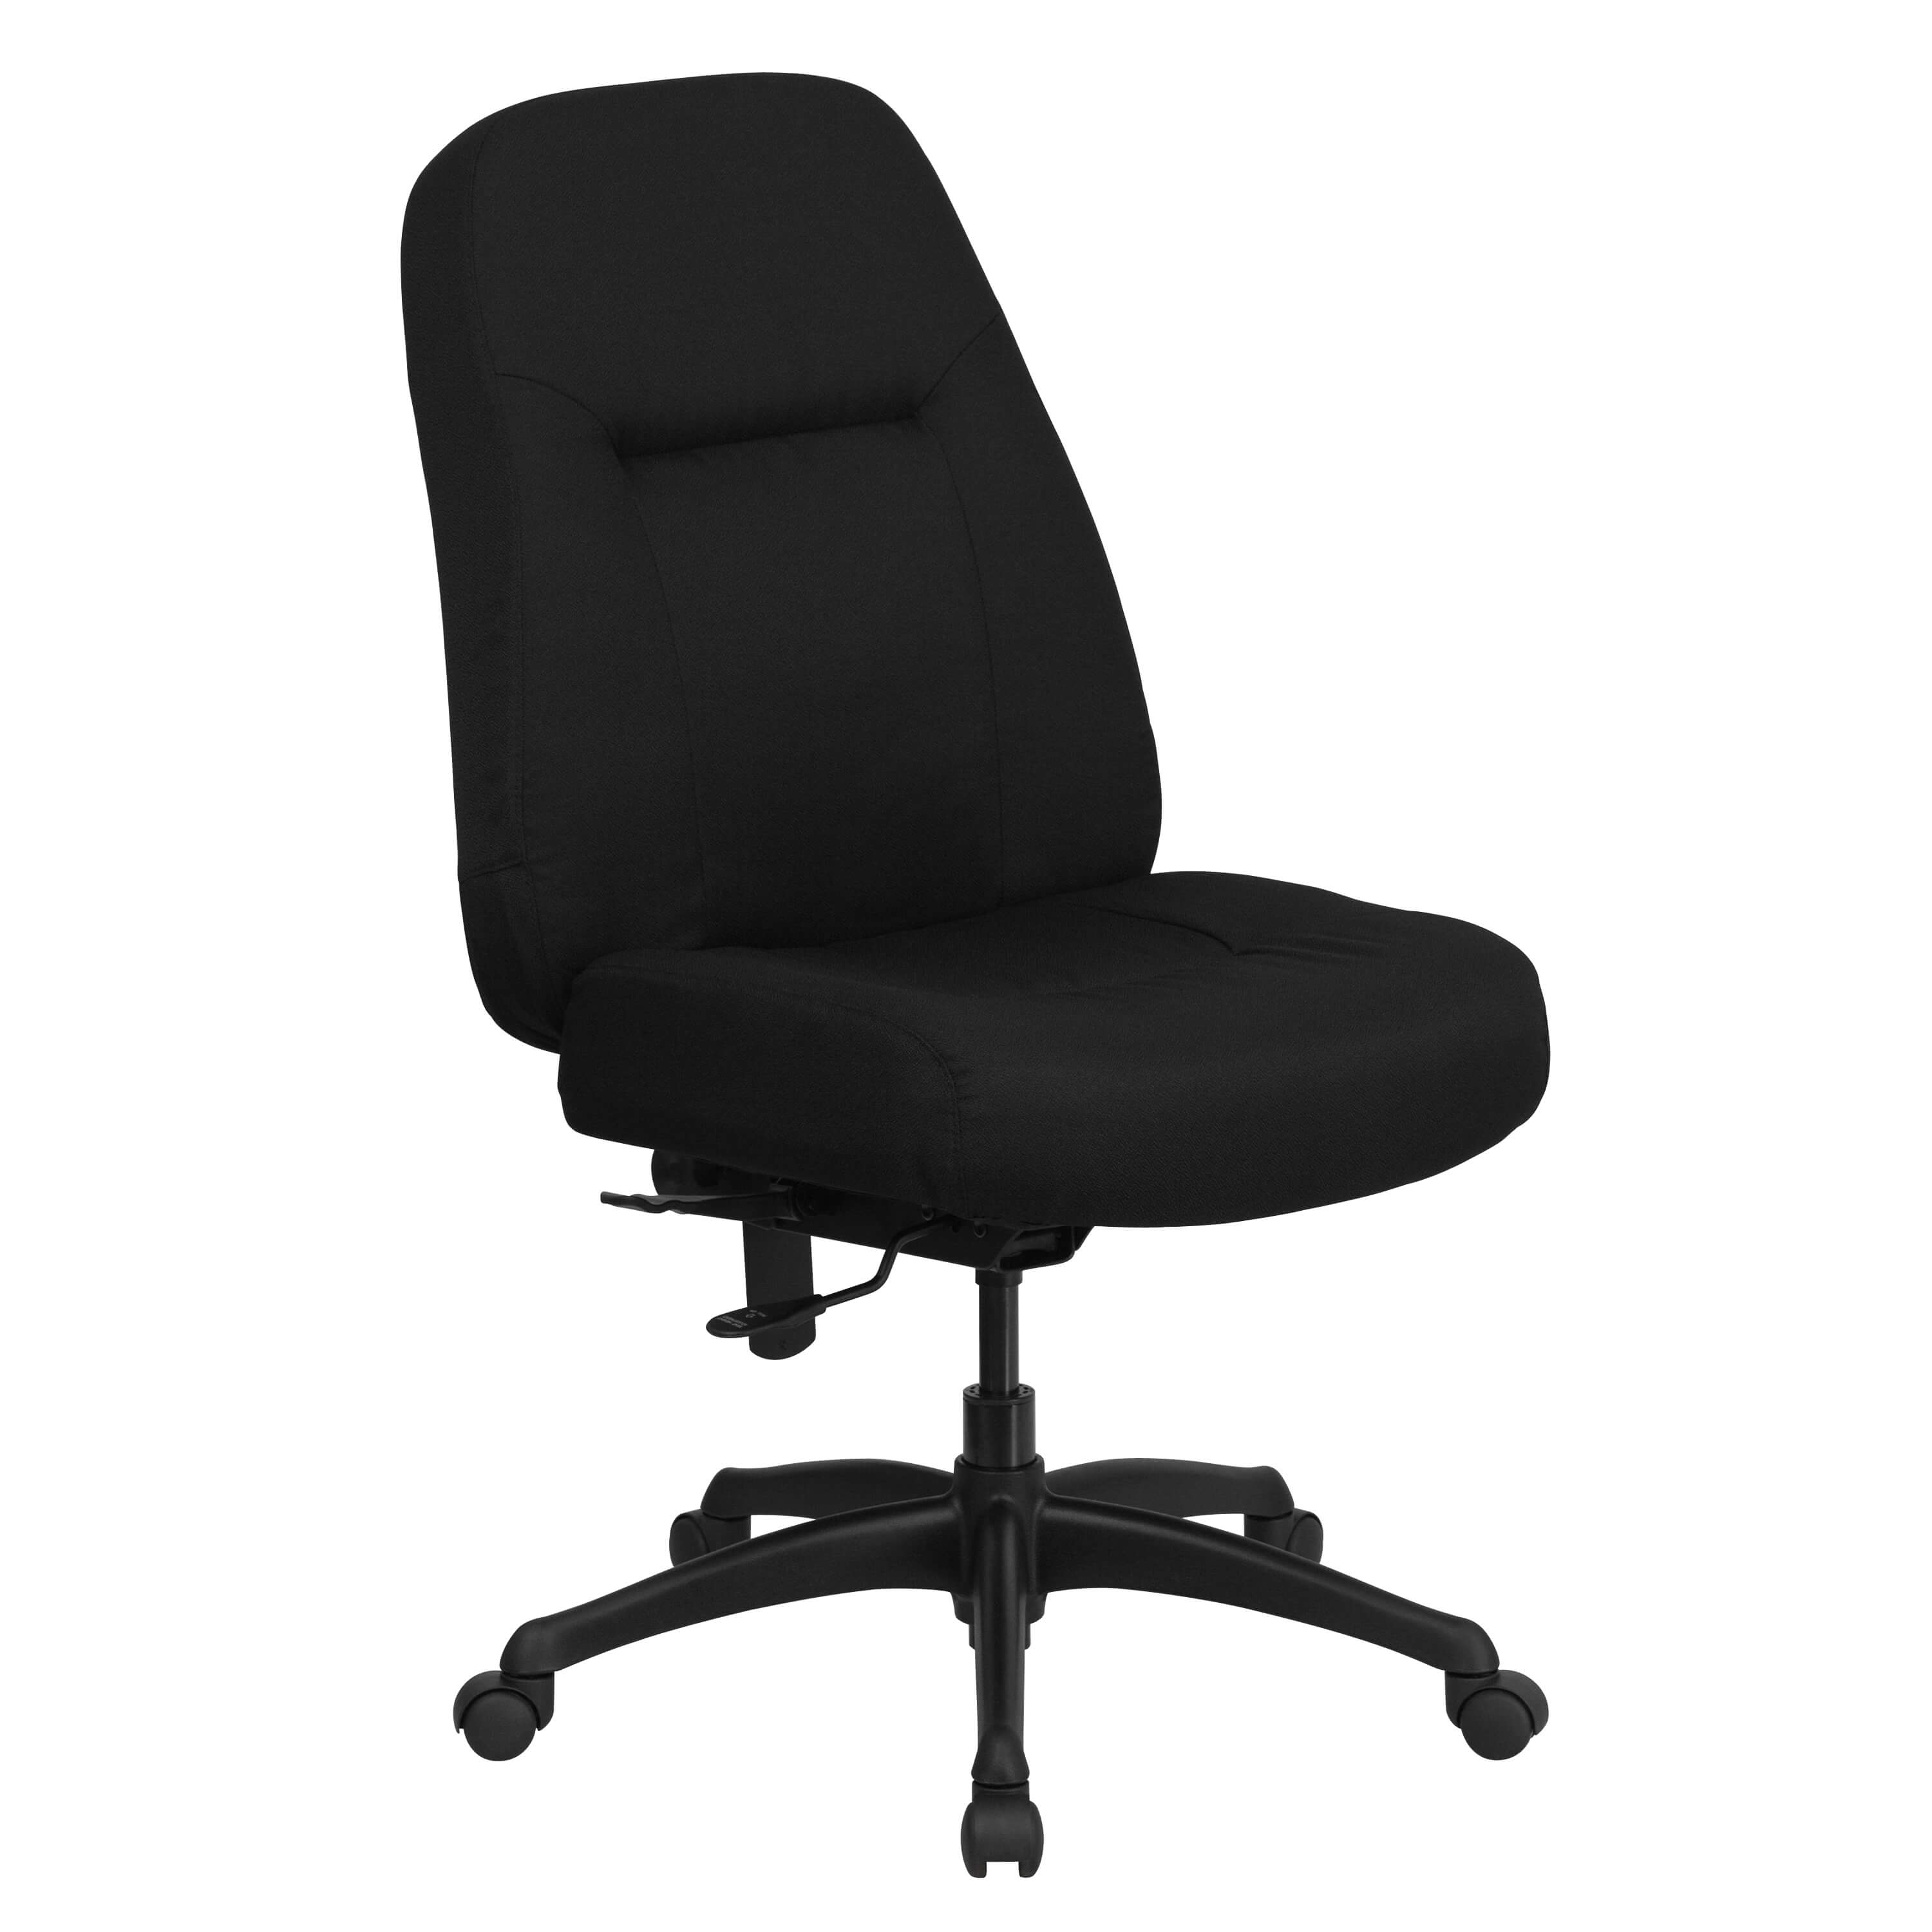 big-and-tall-office-chairs-400-lb-capacity-office-chair.jpg